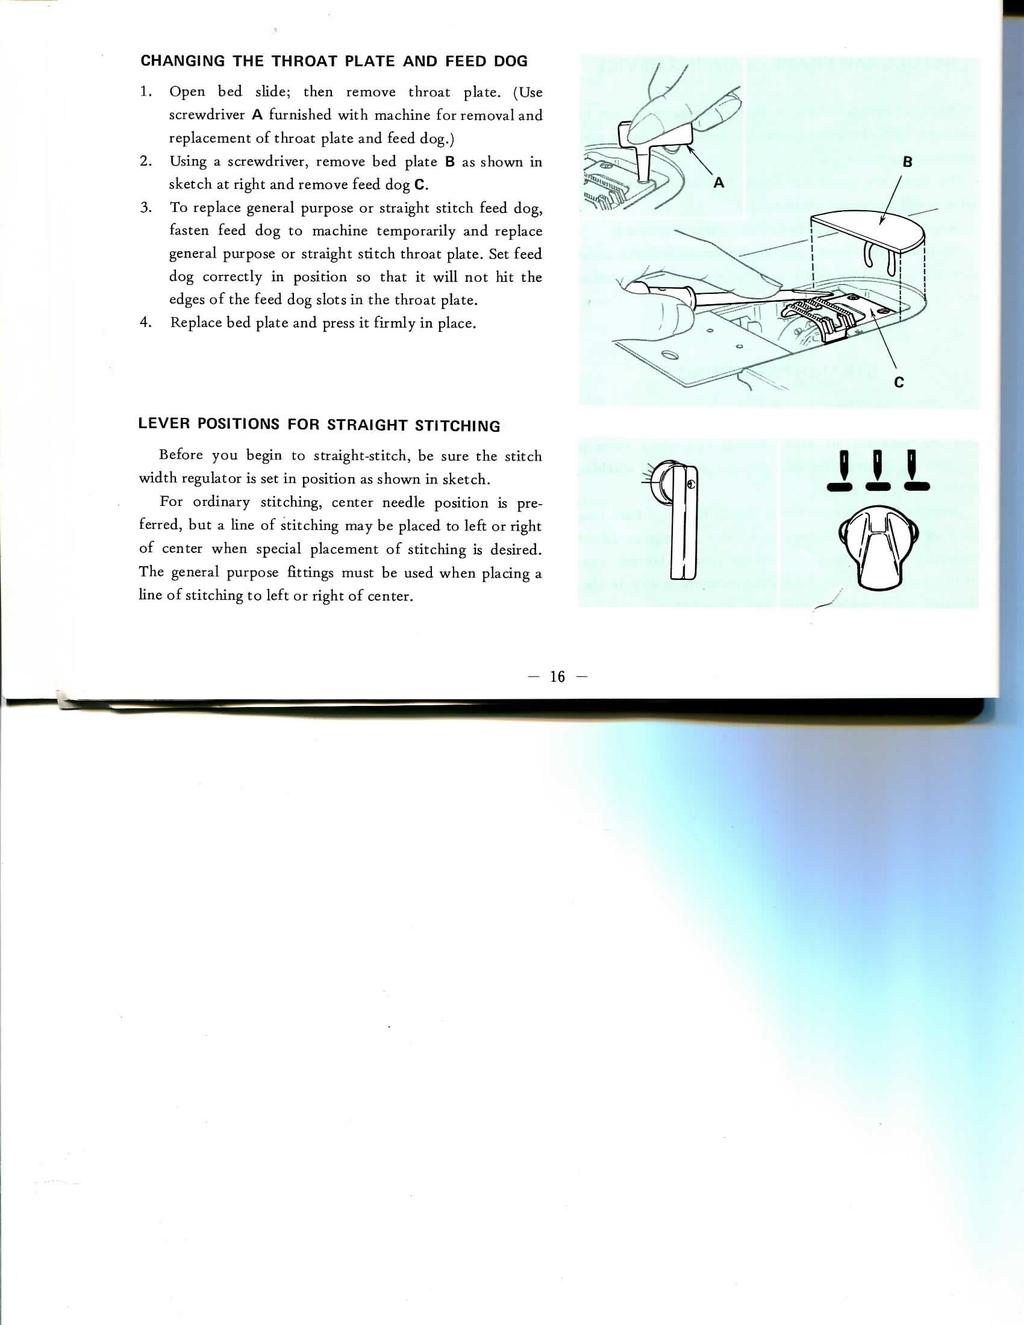 CHANGING THE THROAT PLATE AND FEED DOG 1. Open bed slide; then remove throat plate. (Use screwdriver A furnished with machine for removal and replacement of throat plate and feed dog.) 2.